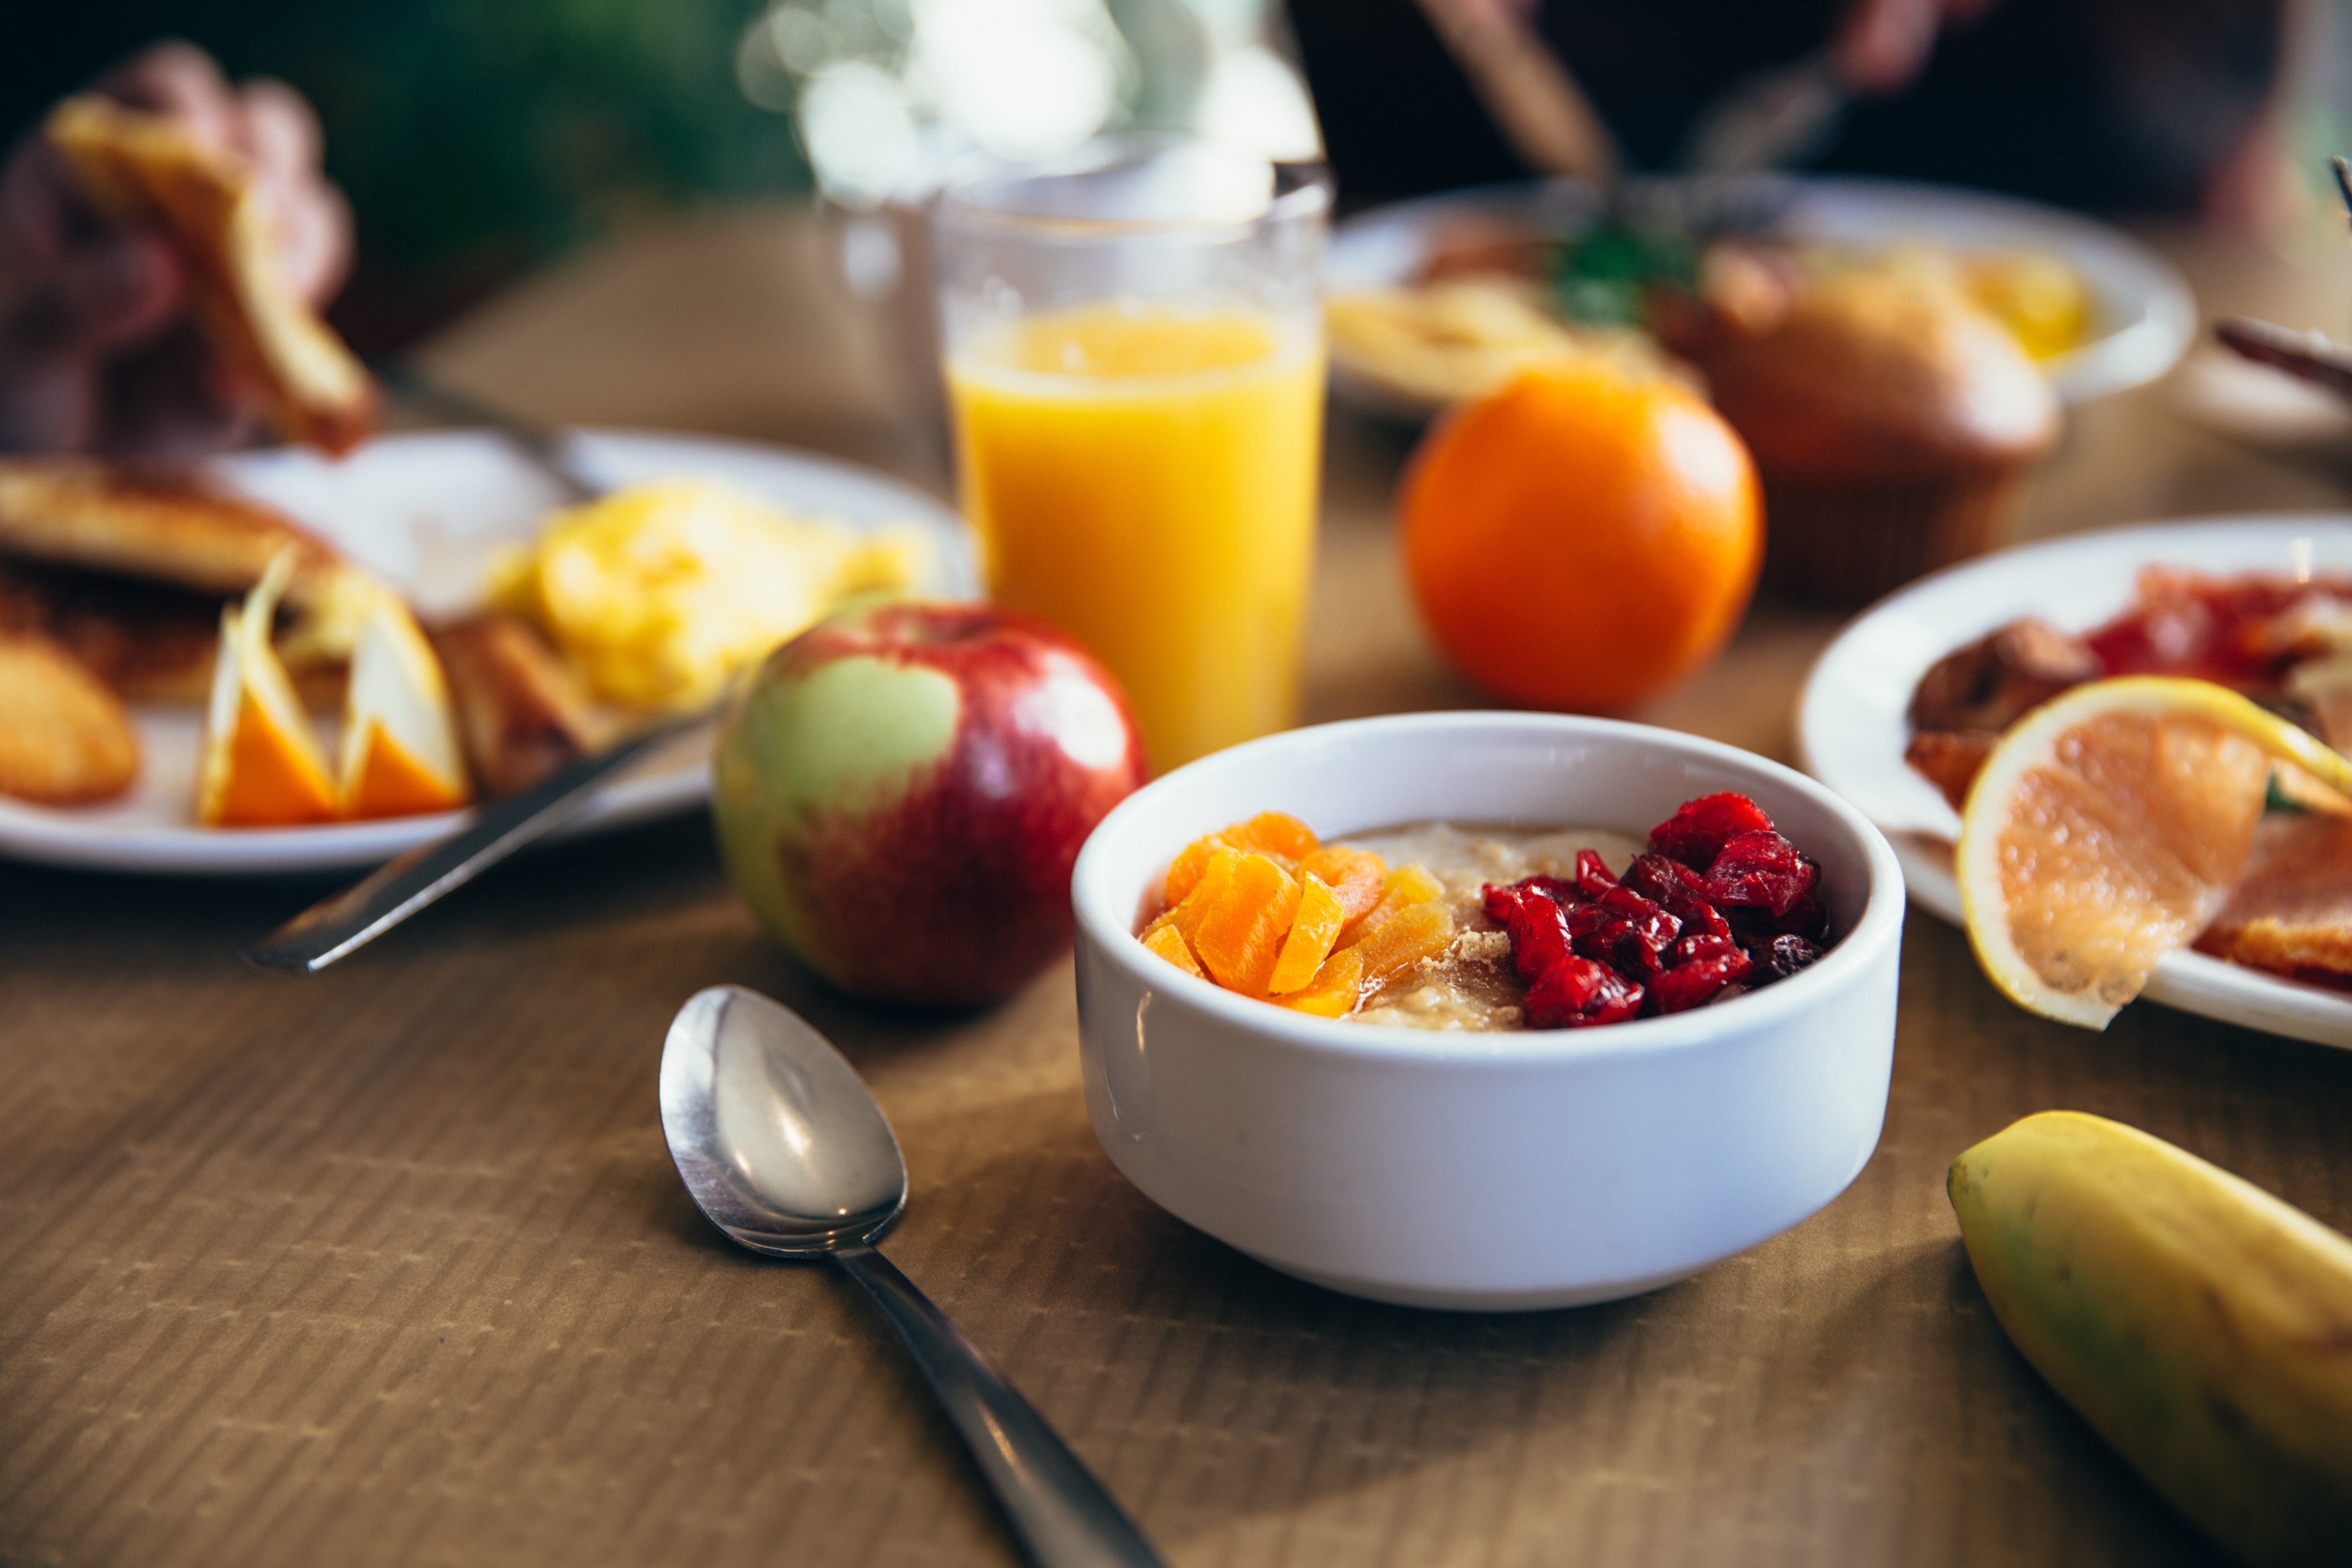 Photograph of breakfast scene with a bowl of cereal